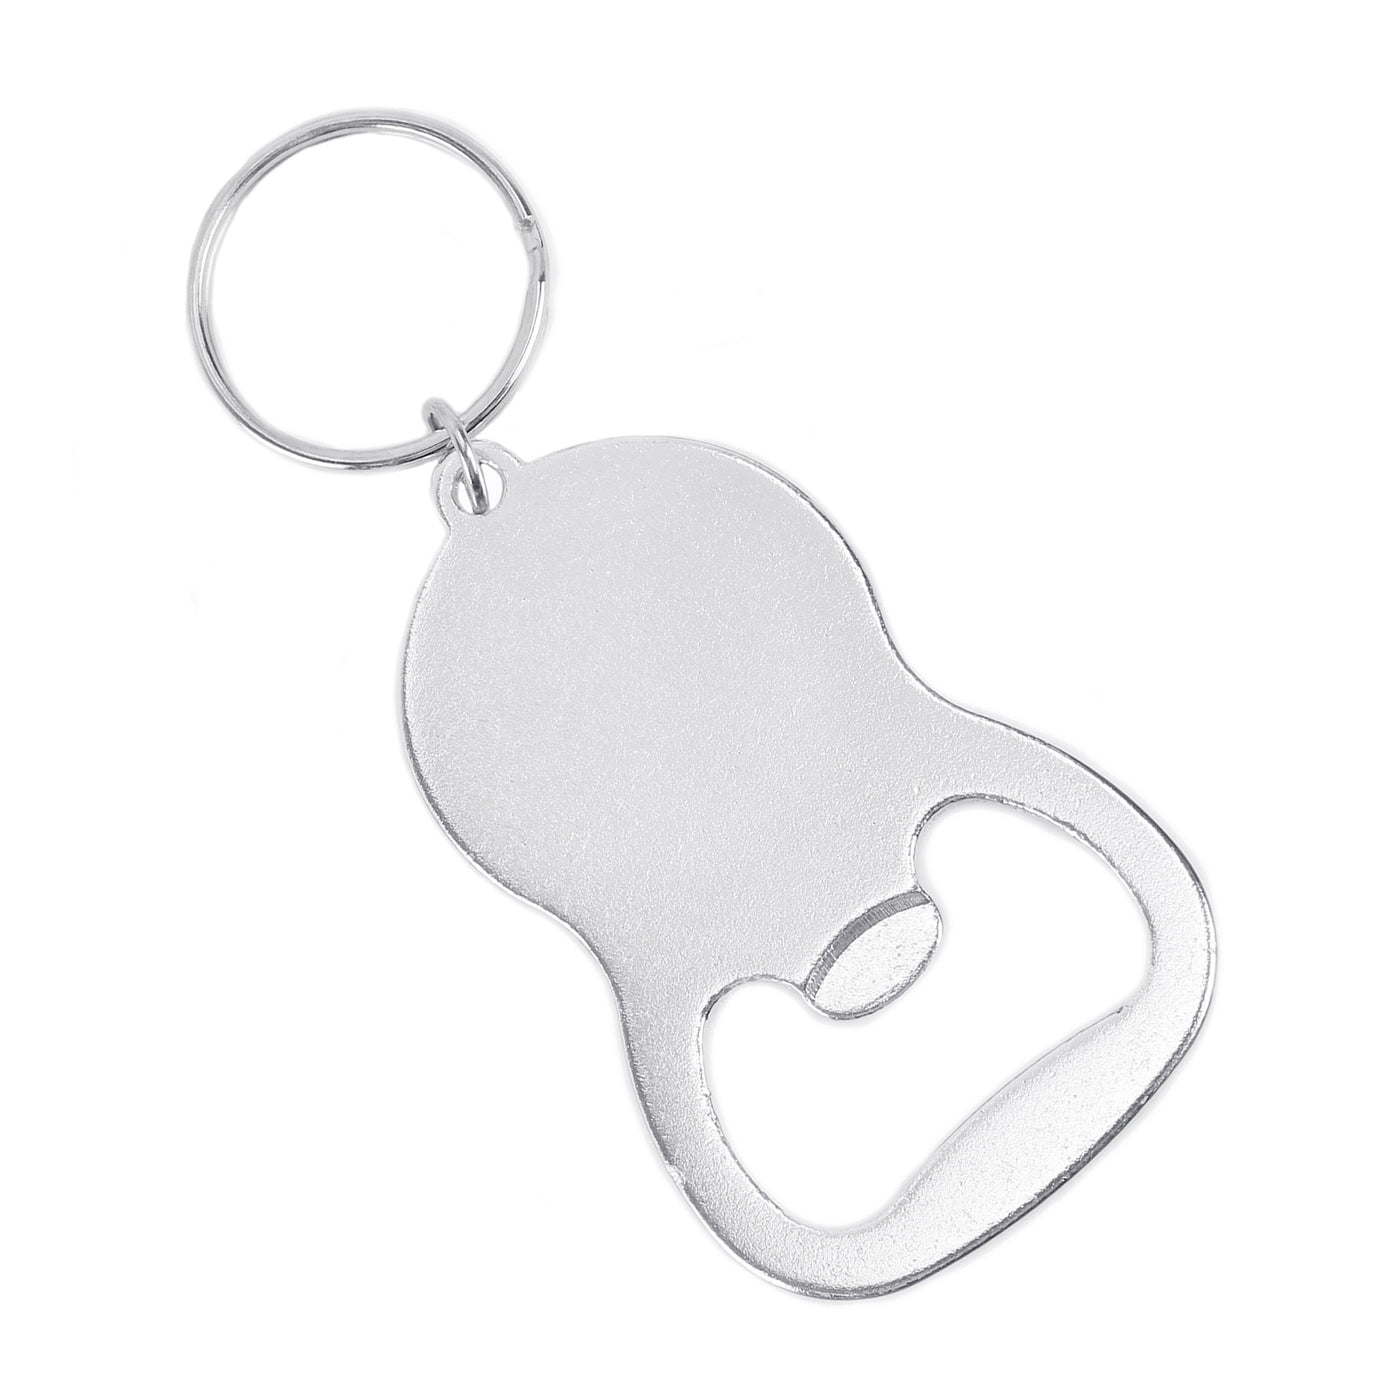 Promotional Aluminum Bottle / Can Opener With Metal Split Keychain Rings -  Blue - Metal Keychains